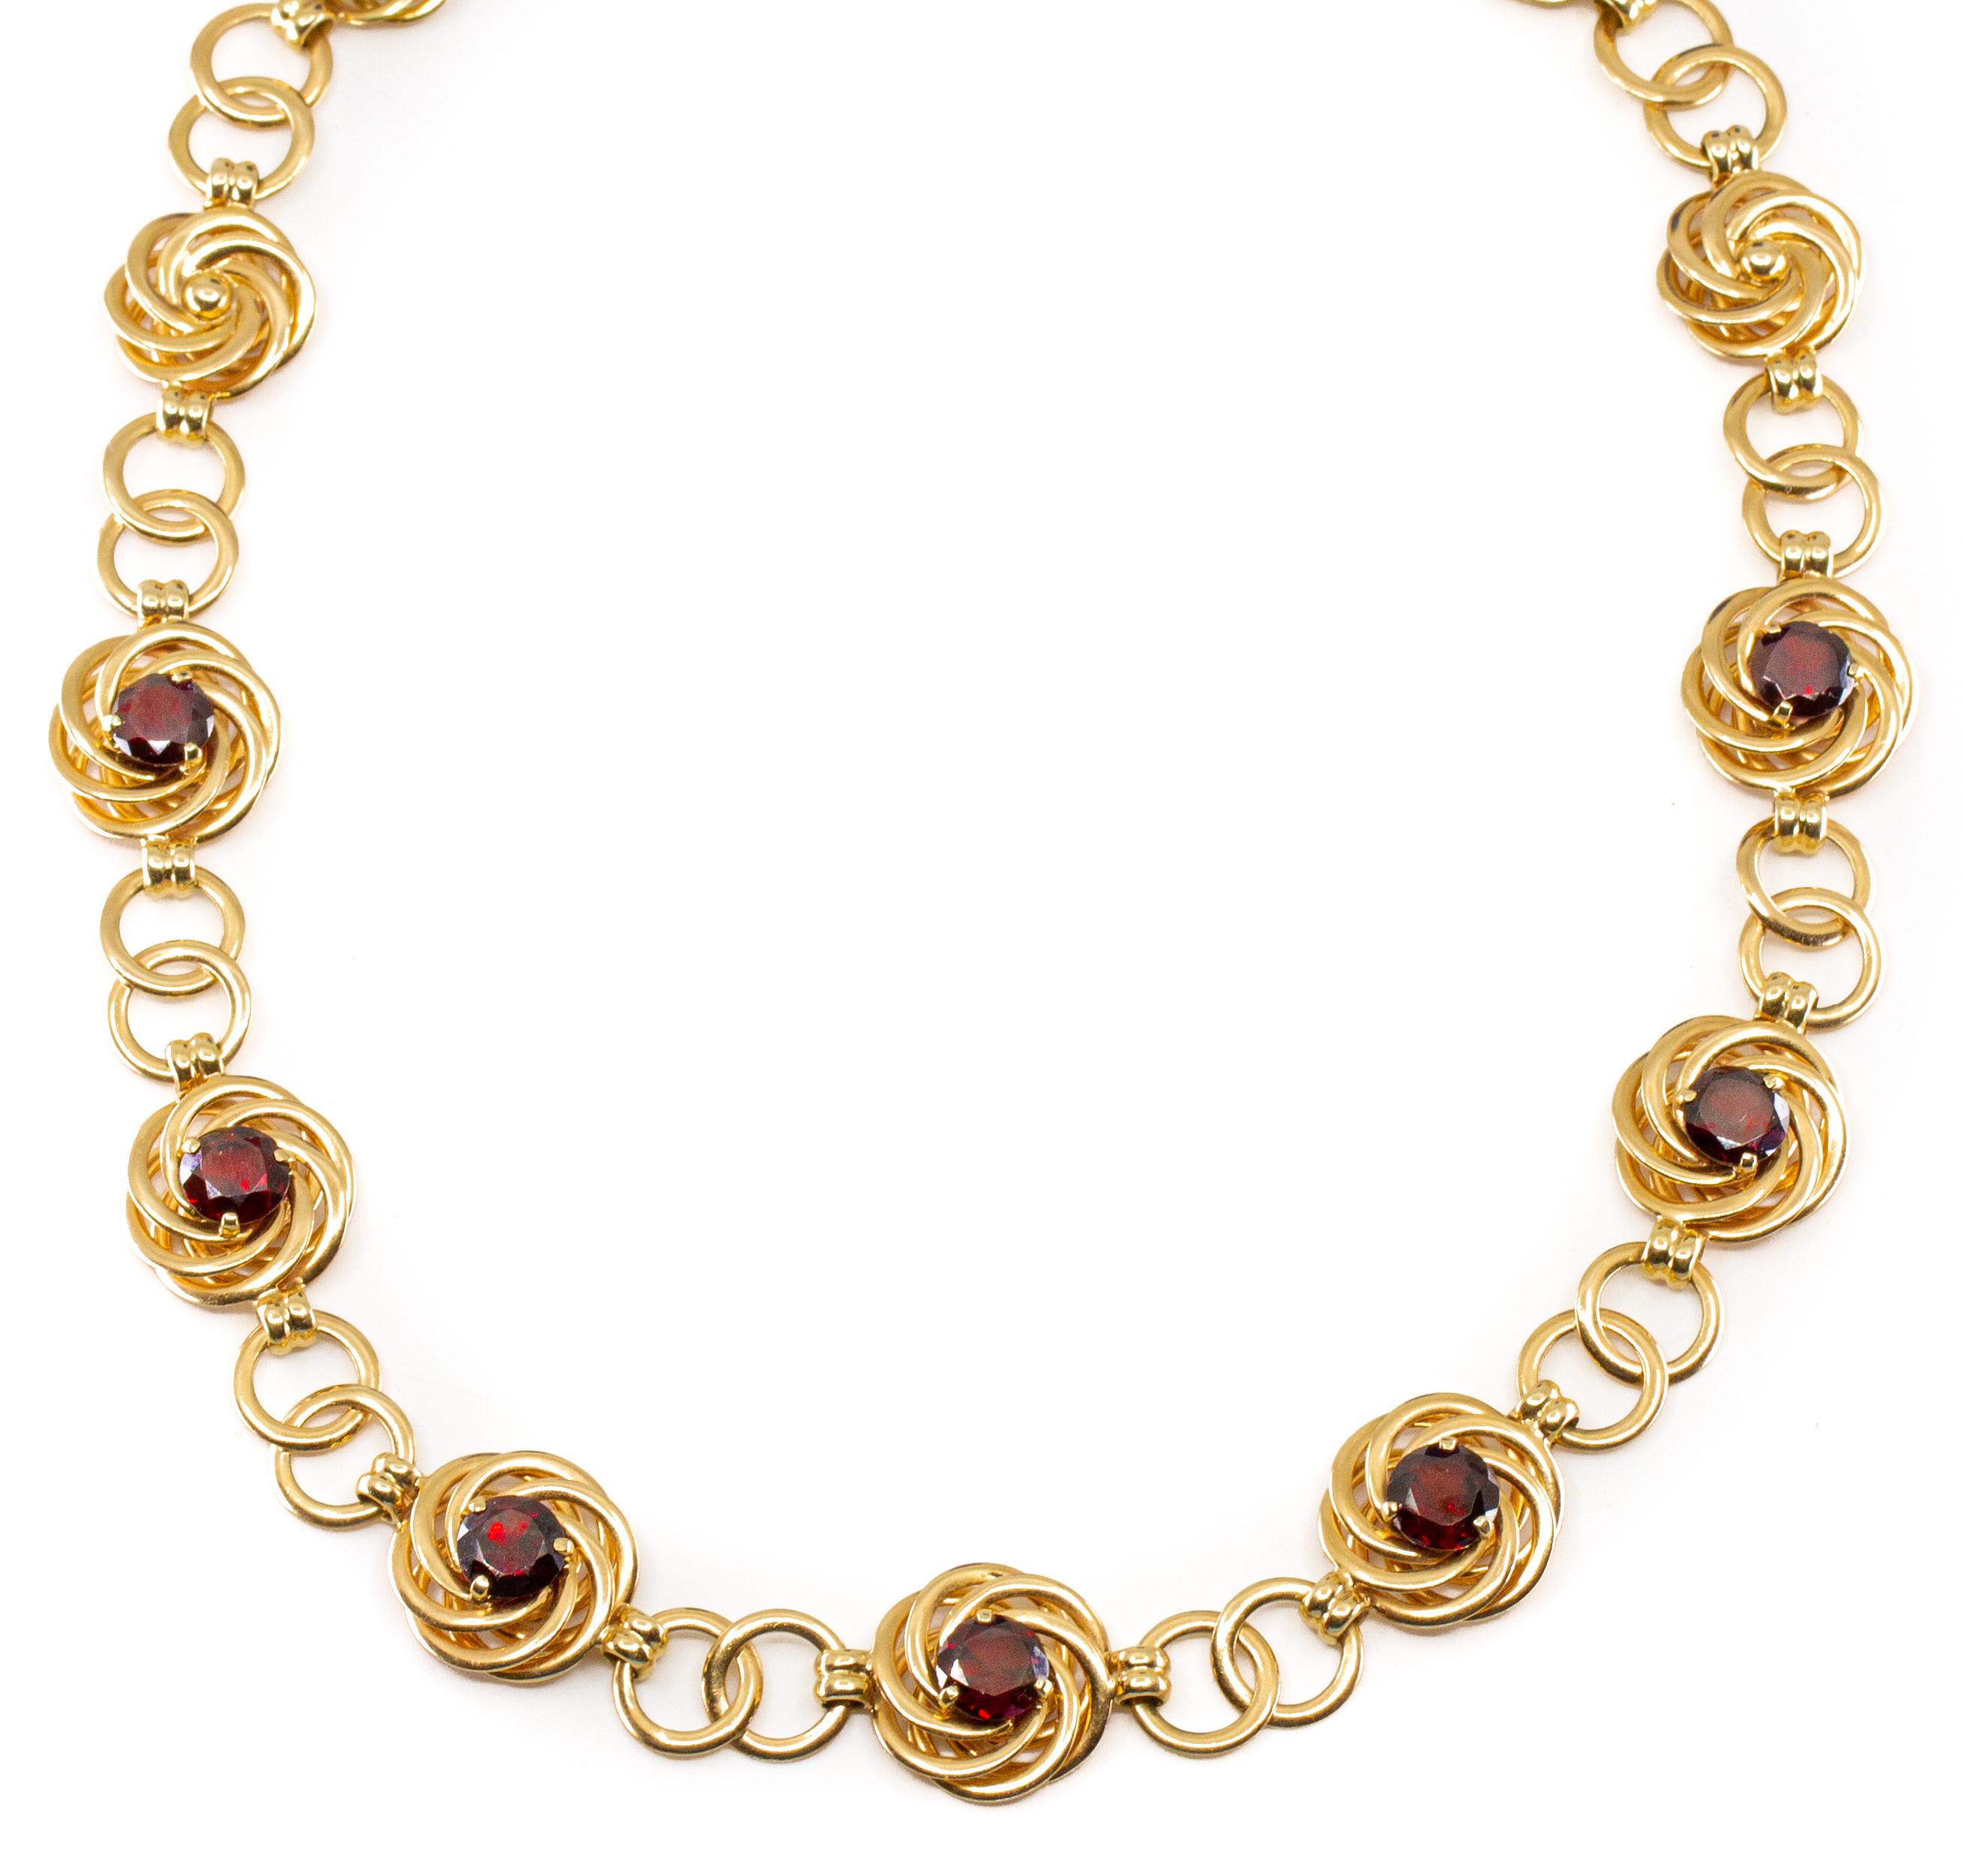 Authentic Tiffany and Co. 14kt Gold and Garnet Necklace, Circa 1960 1